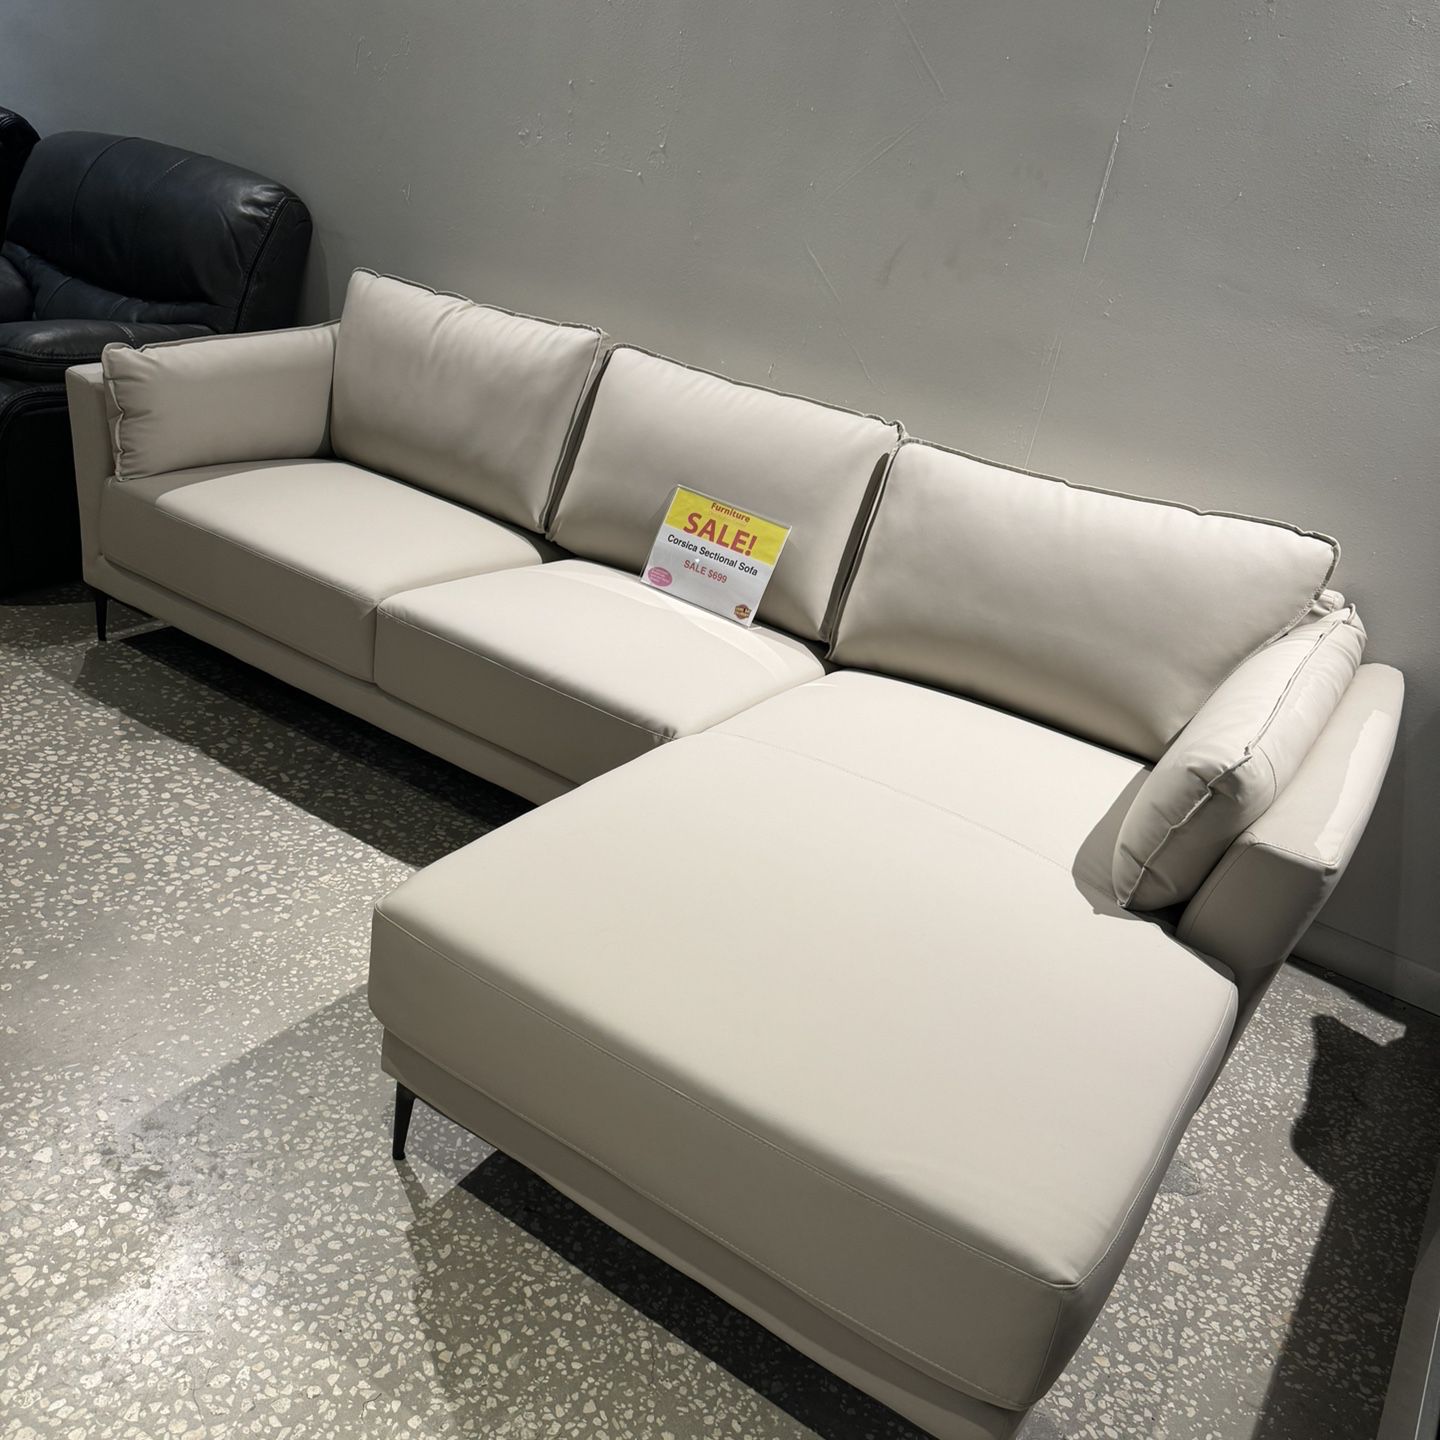 GORGEOUS CORSICA BEIGE SECTIONAL SOFA!$699!*SAME DAY DELIVERY*NO CREDIT NEEDED*EASY FINANCING*HUGE SALE*